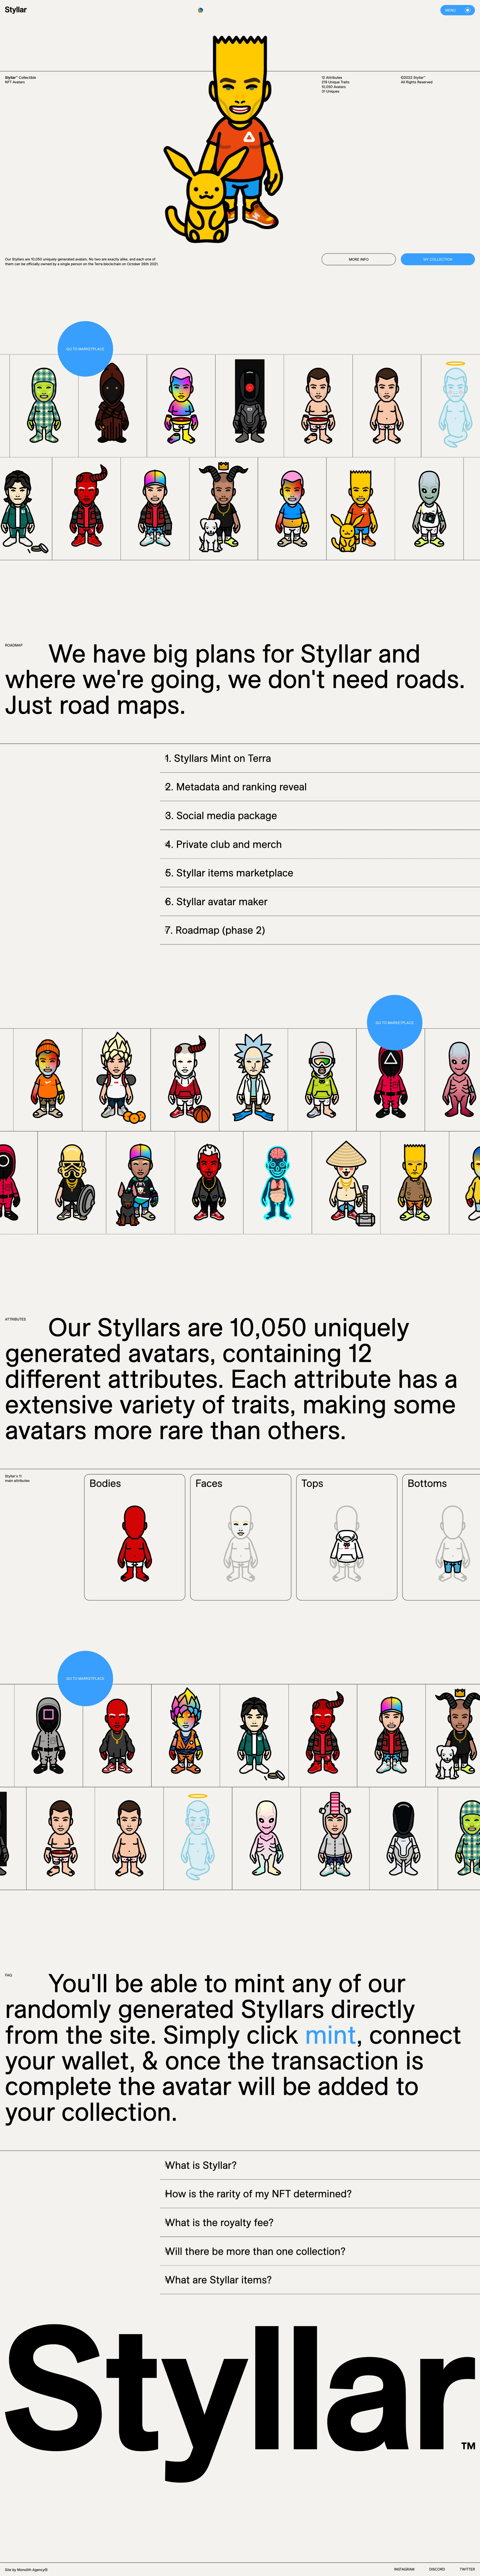 Styllar Landing Page Example: Our Styllars are 10,050 uniquely generated avatars. No two are exactly alike, and each one of them can be officially owned by a single person on the Terra blockchain on October 26th 2021.